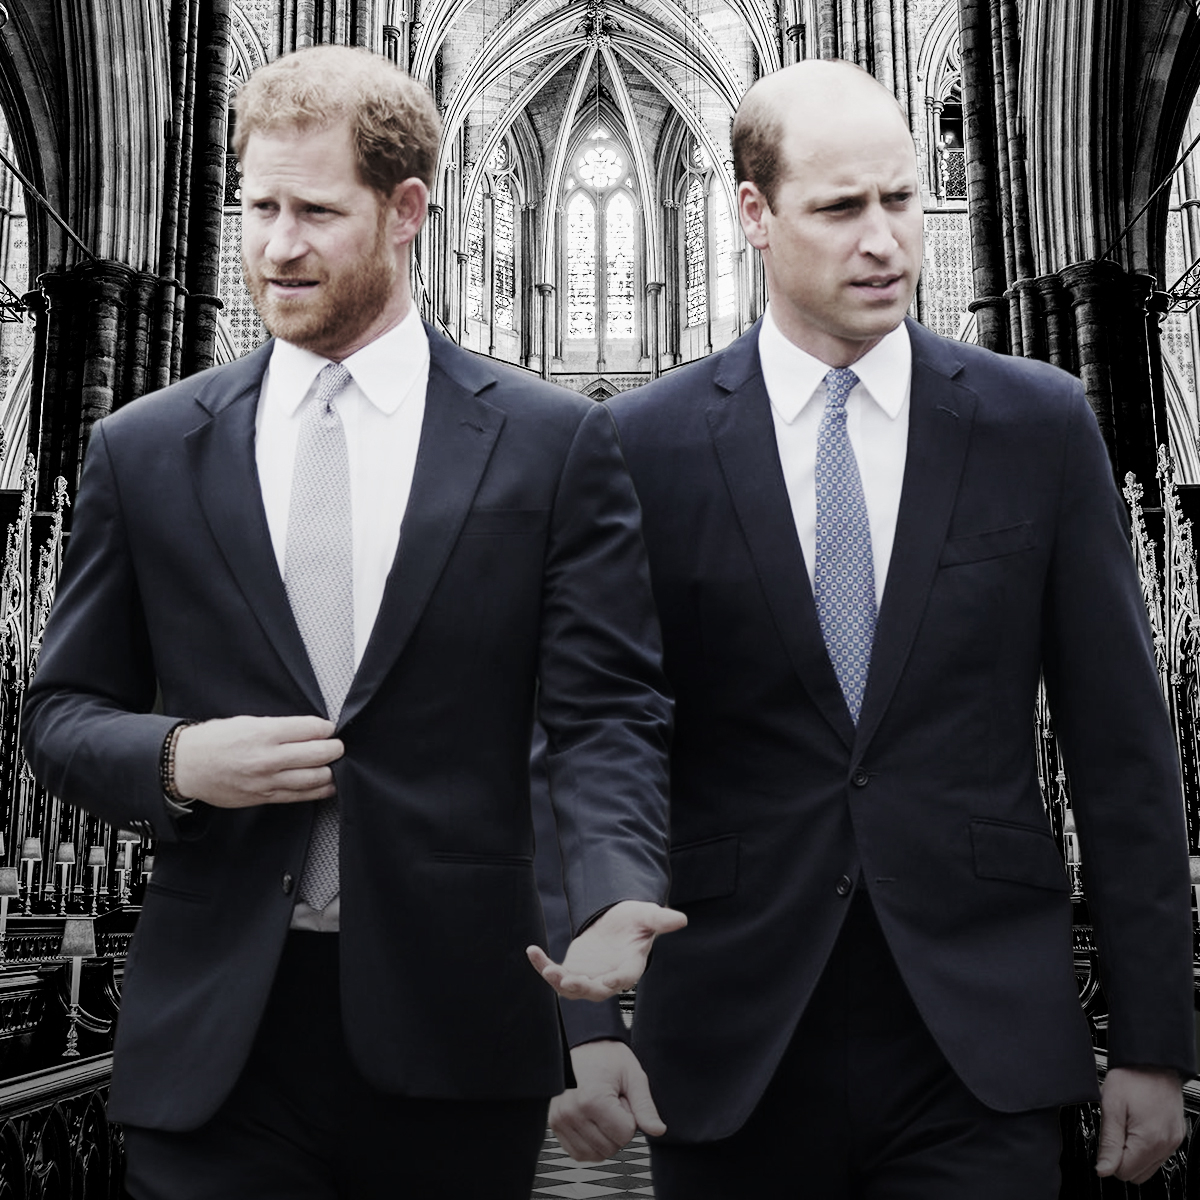 Why Omid Scobie Says There’s “No Going Back” for Prince Harry, William